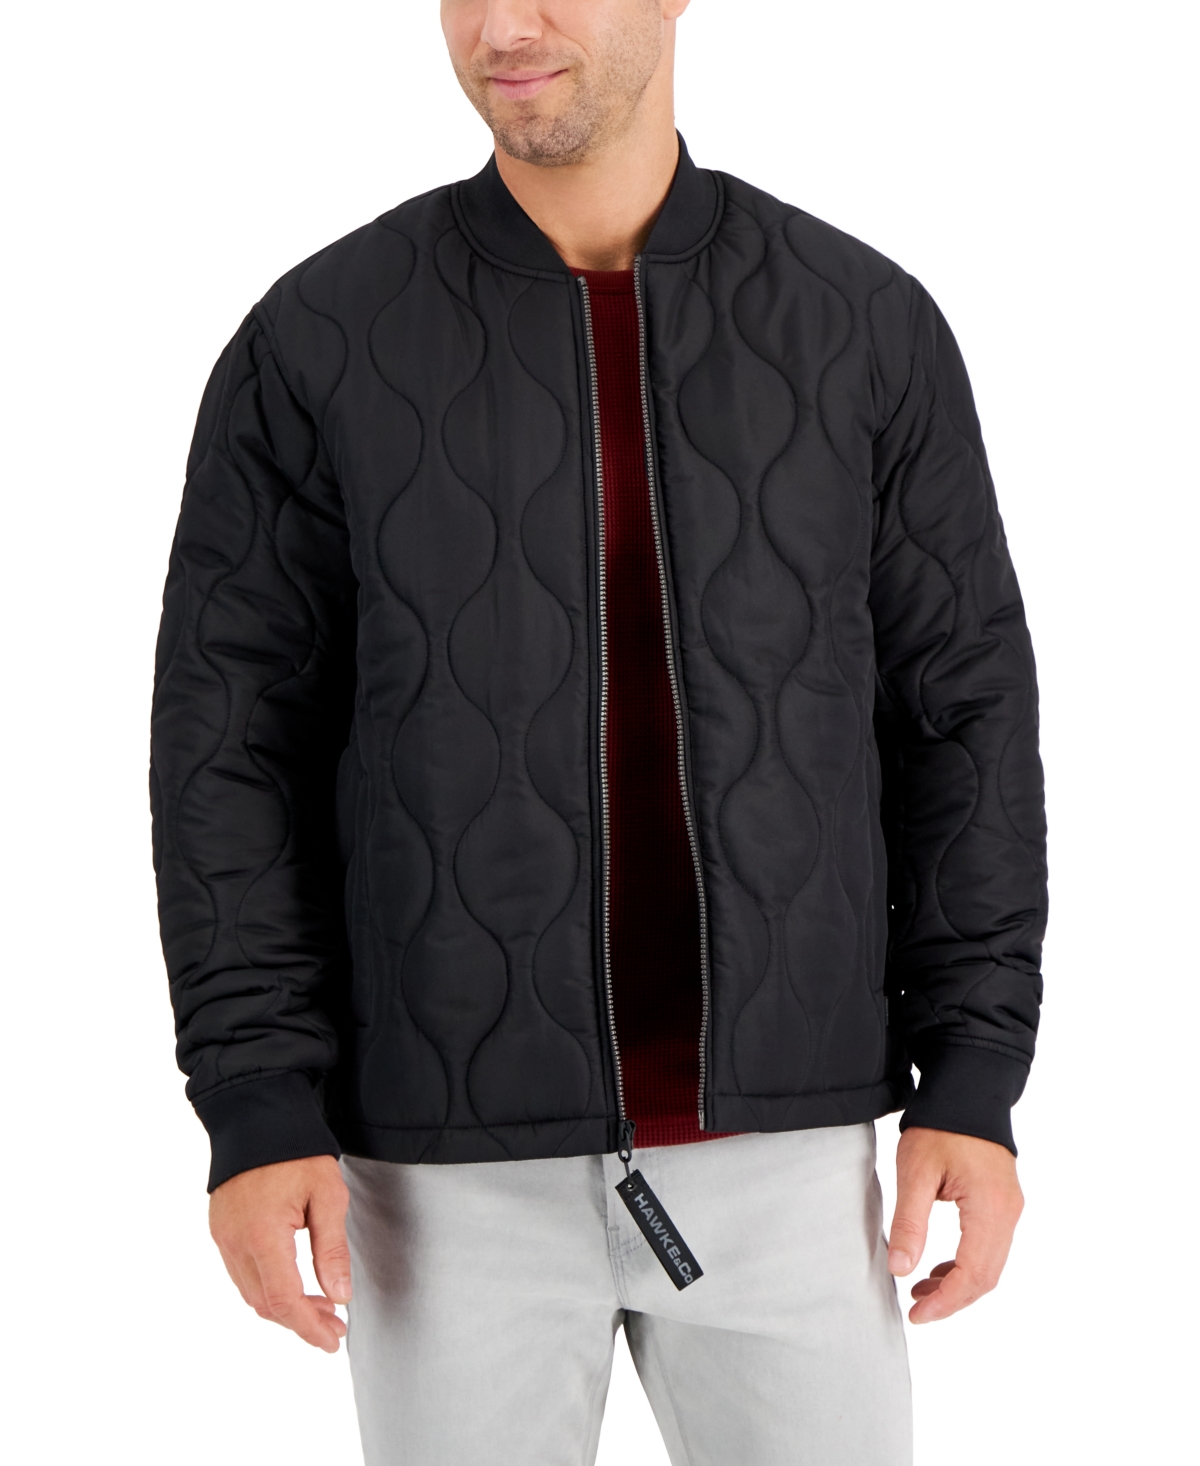 Men's Onion Quilted Jacket - Loden